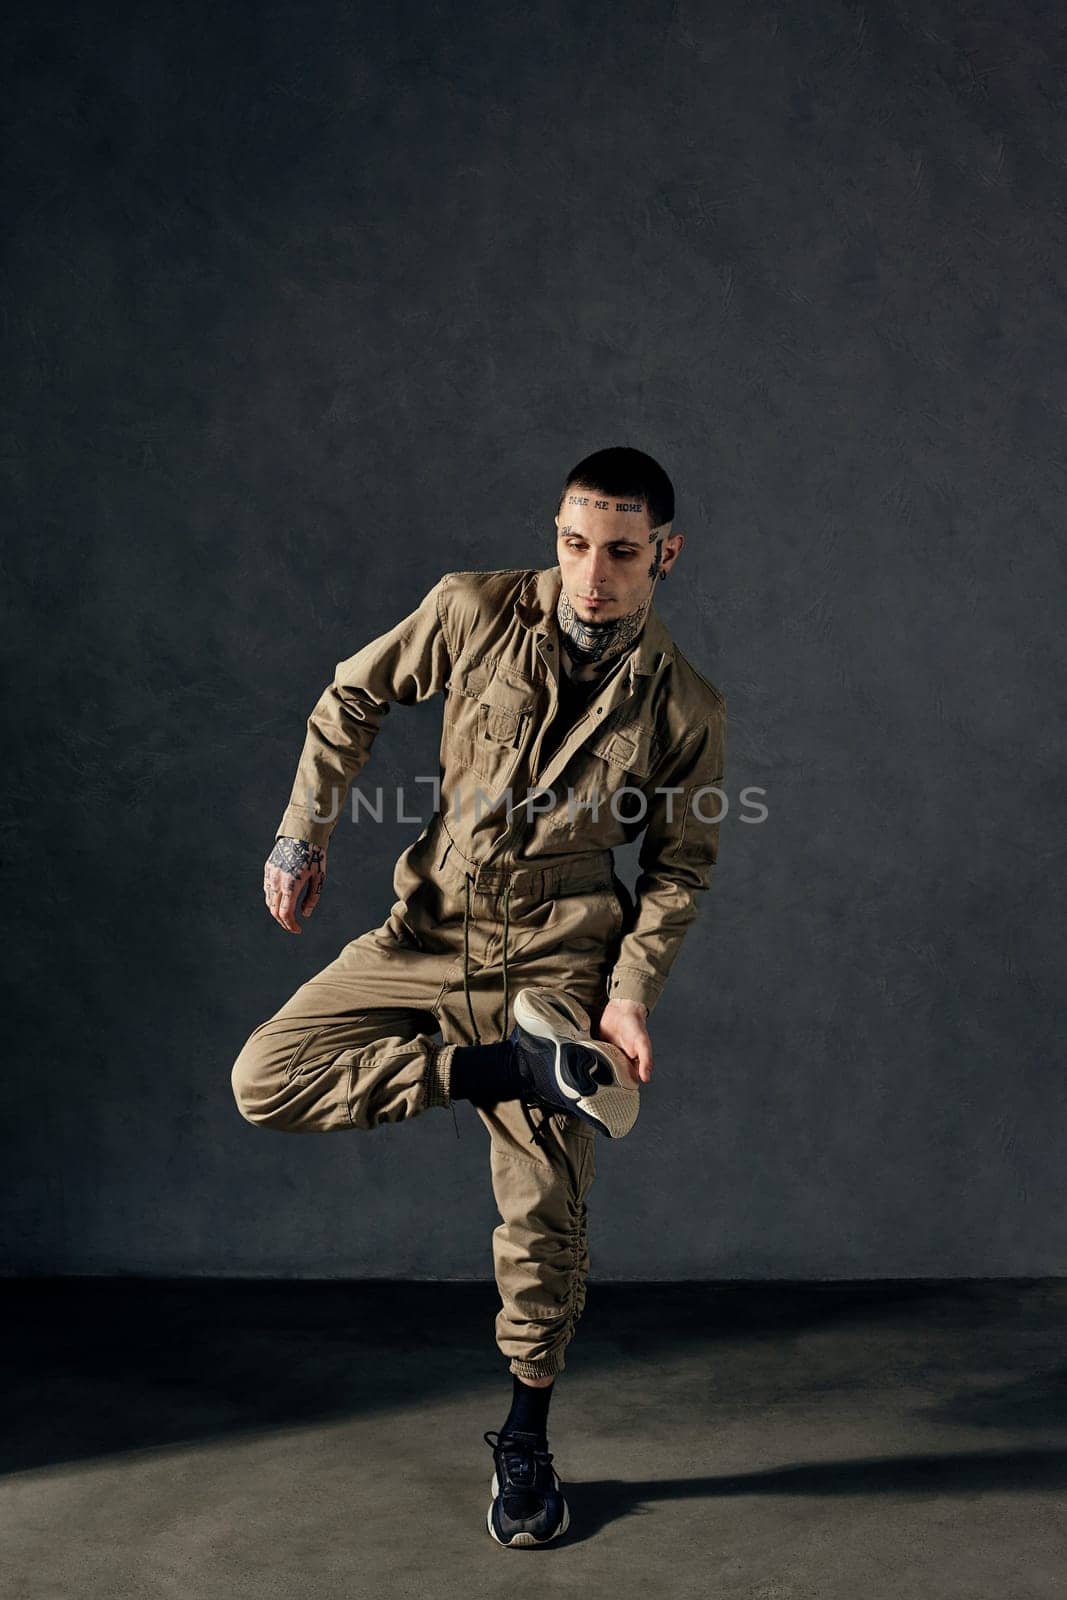 Young handsome man with tattooed body and face, earrings, beard. Dressed in khaki overalls and black sneakers. He is dancing against gray studio background. Dancehall, hip-hop. Full length, copy space